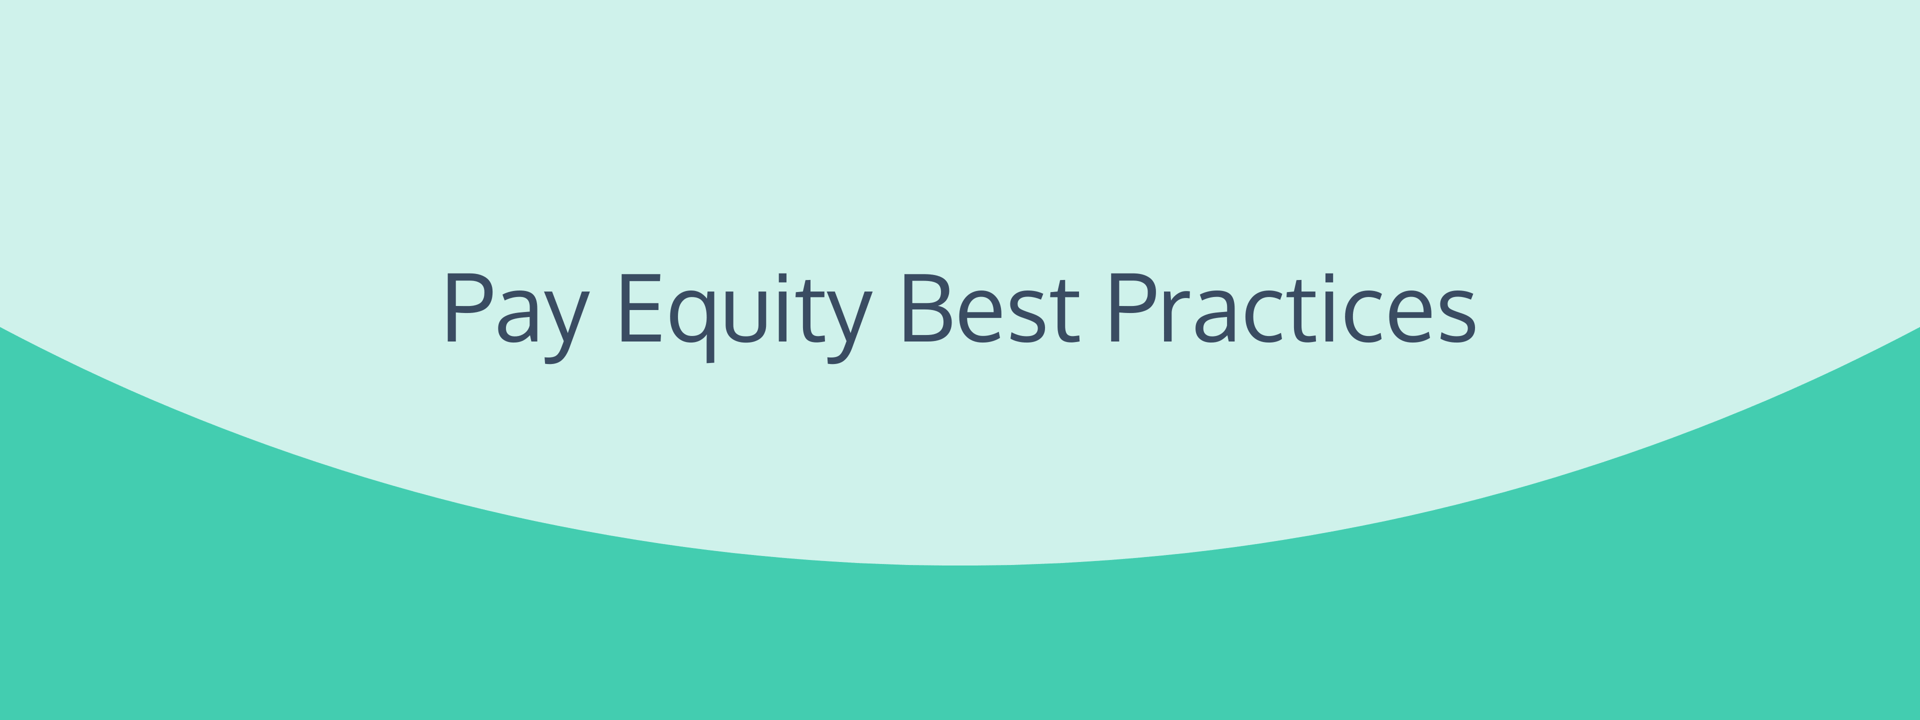 Pay Equity Best Practices